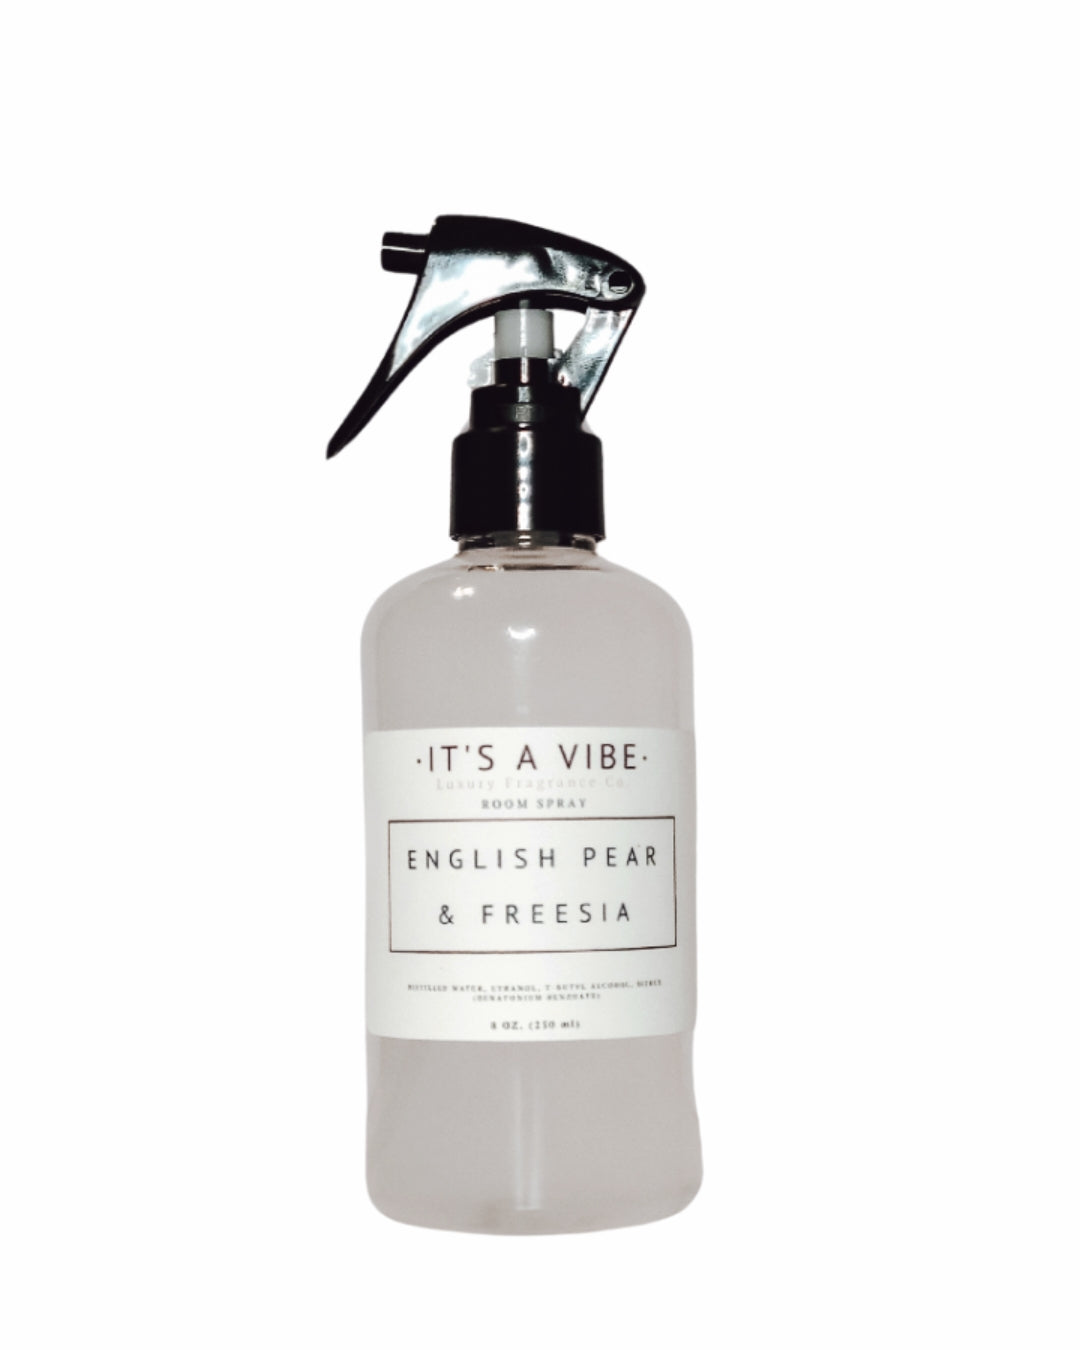 English Pear & Freesia (Jo Malone Type) - Luxury Room Spray *Limited Release*